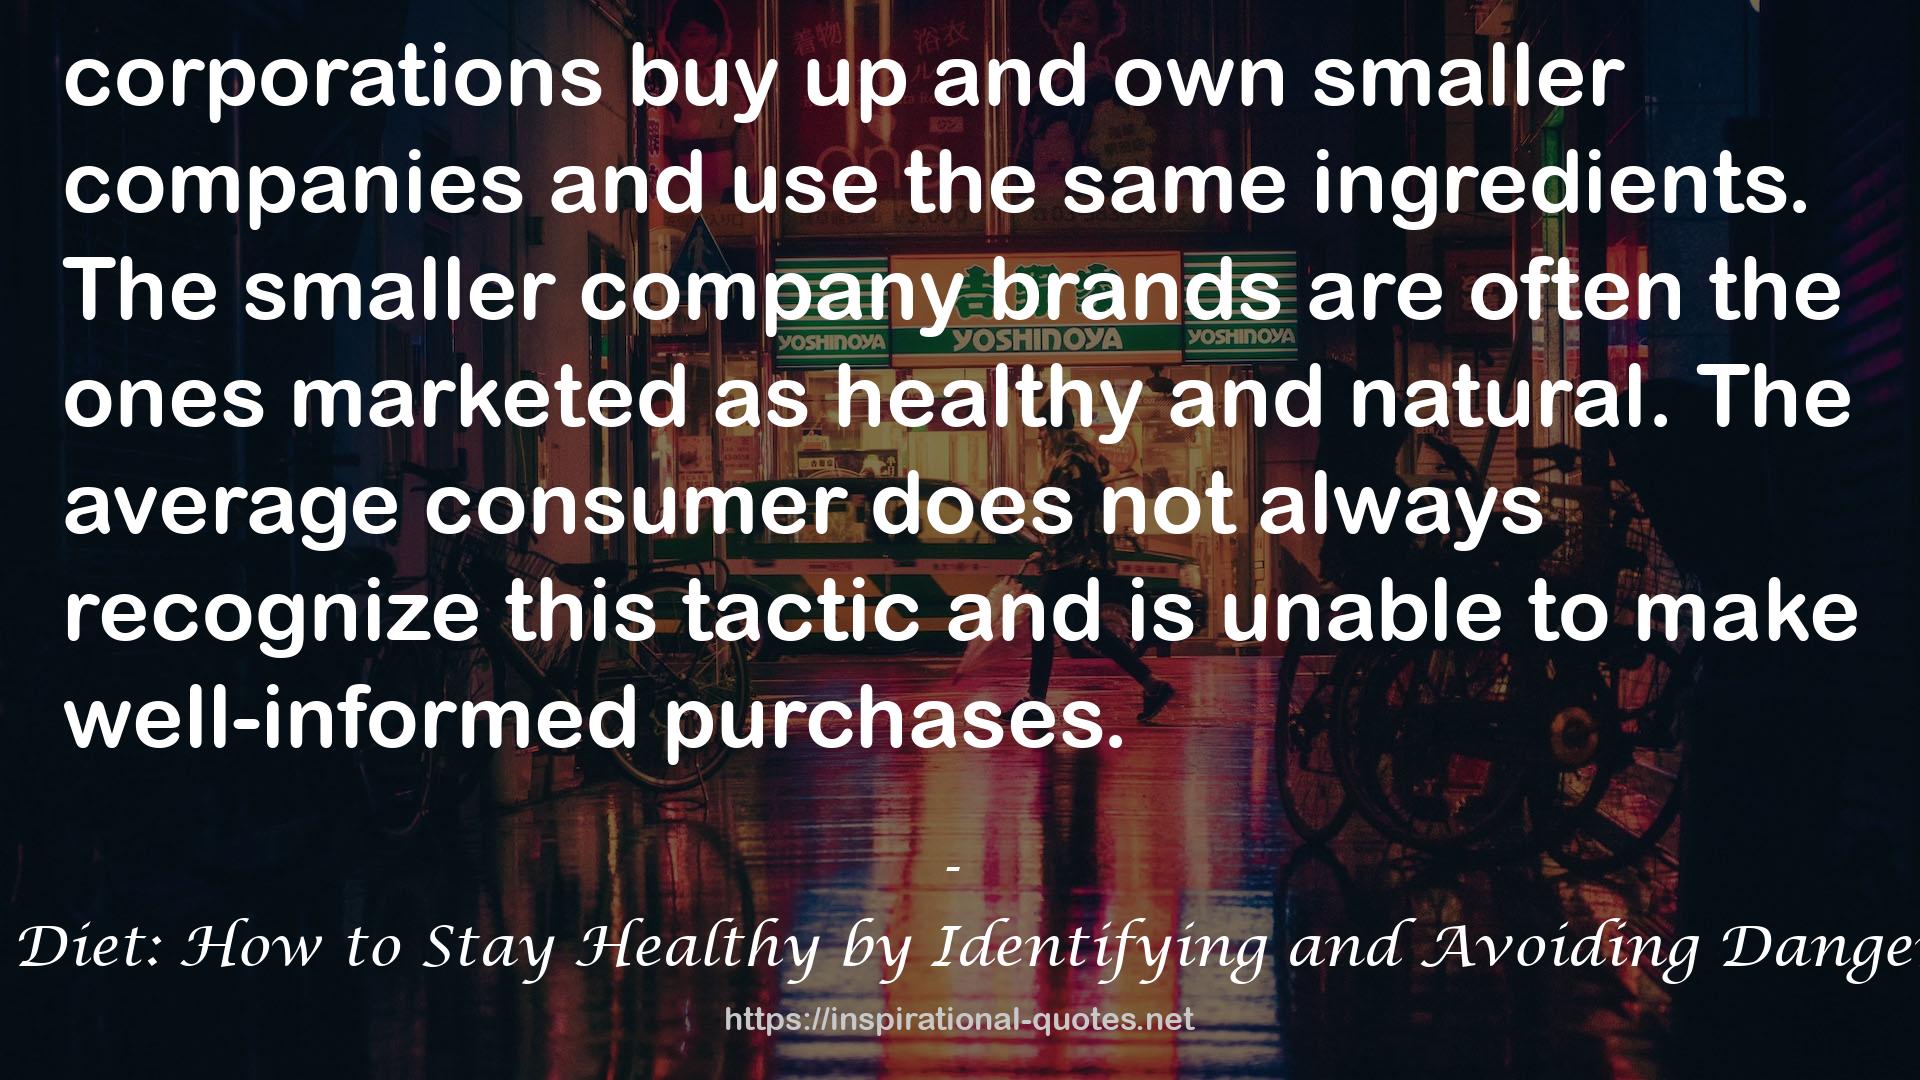 GMO Free Diet: How to Stay Healthy by Identifying and Avoiding Dangerous Foods QUOTES